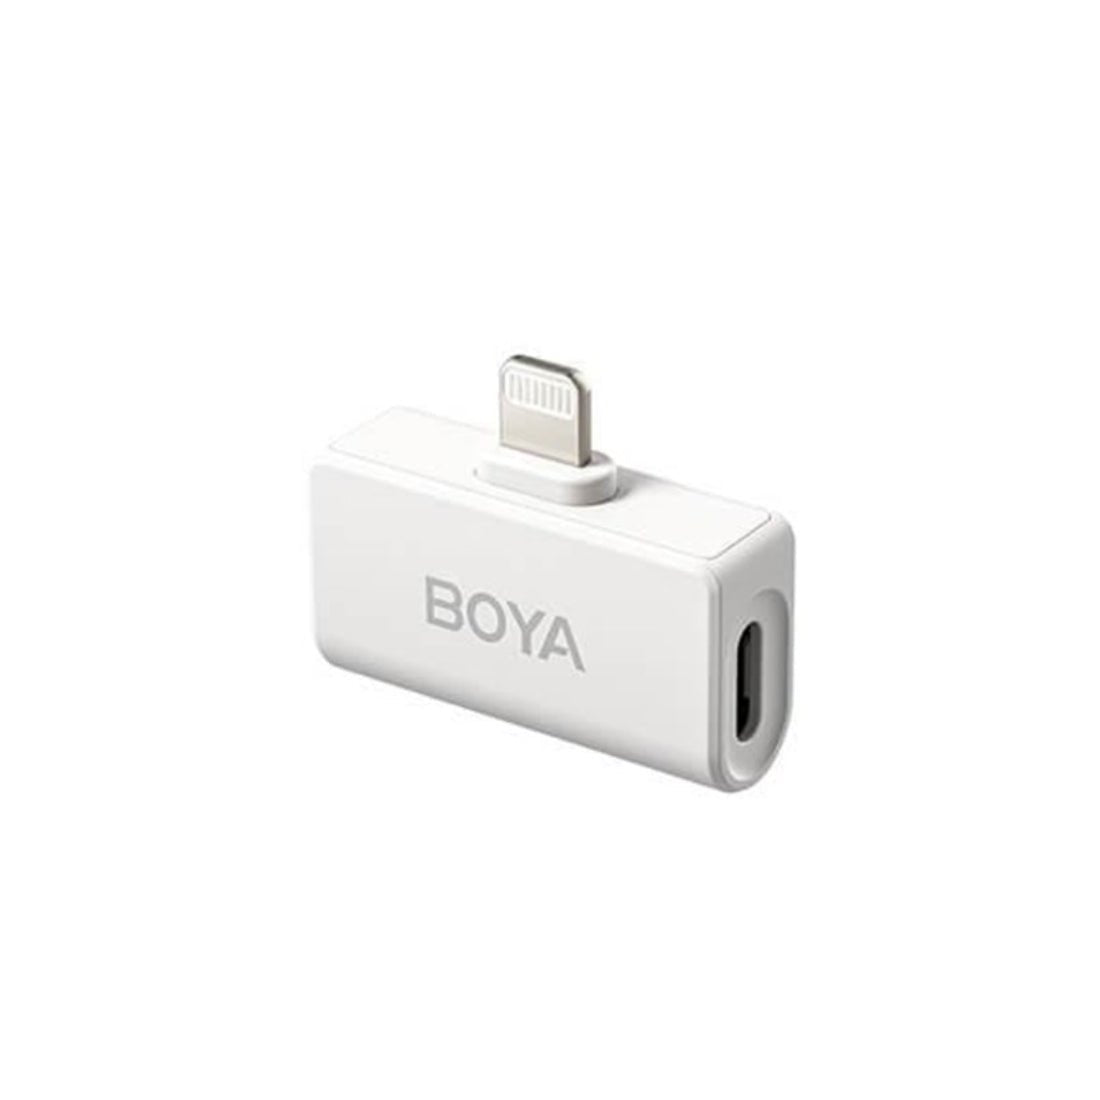 Boya Omic - D 2.4GHz Dual - Channel Wireless With Lightning Connector Microphone System - White - ميكروفون - Store 974 | ستور ٩٧٤